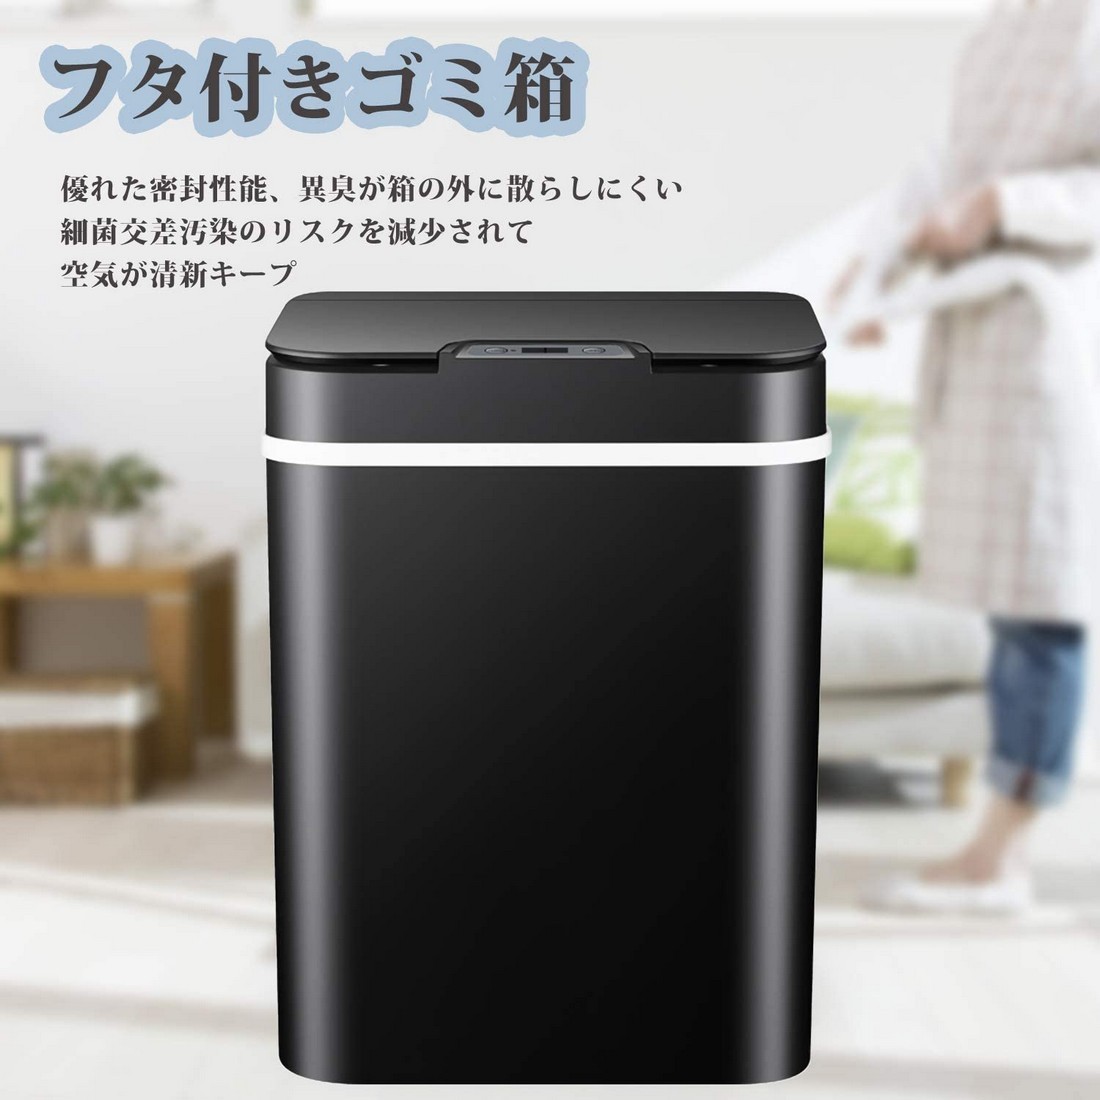  Smart waste basket sensor attaching full automation opening and closing 12L cover attaching trash can contactless Smart induction waste basket stylish living room sl1165-bk